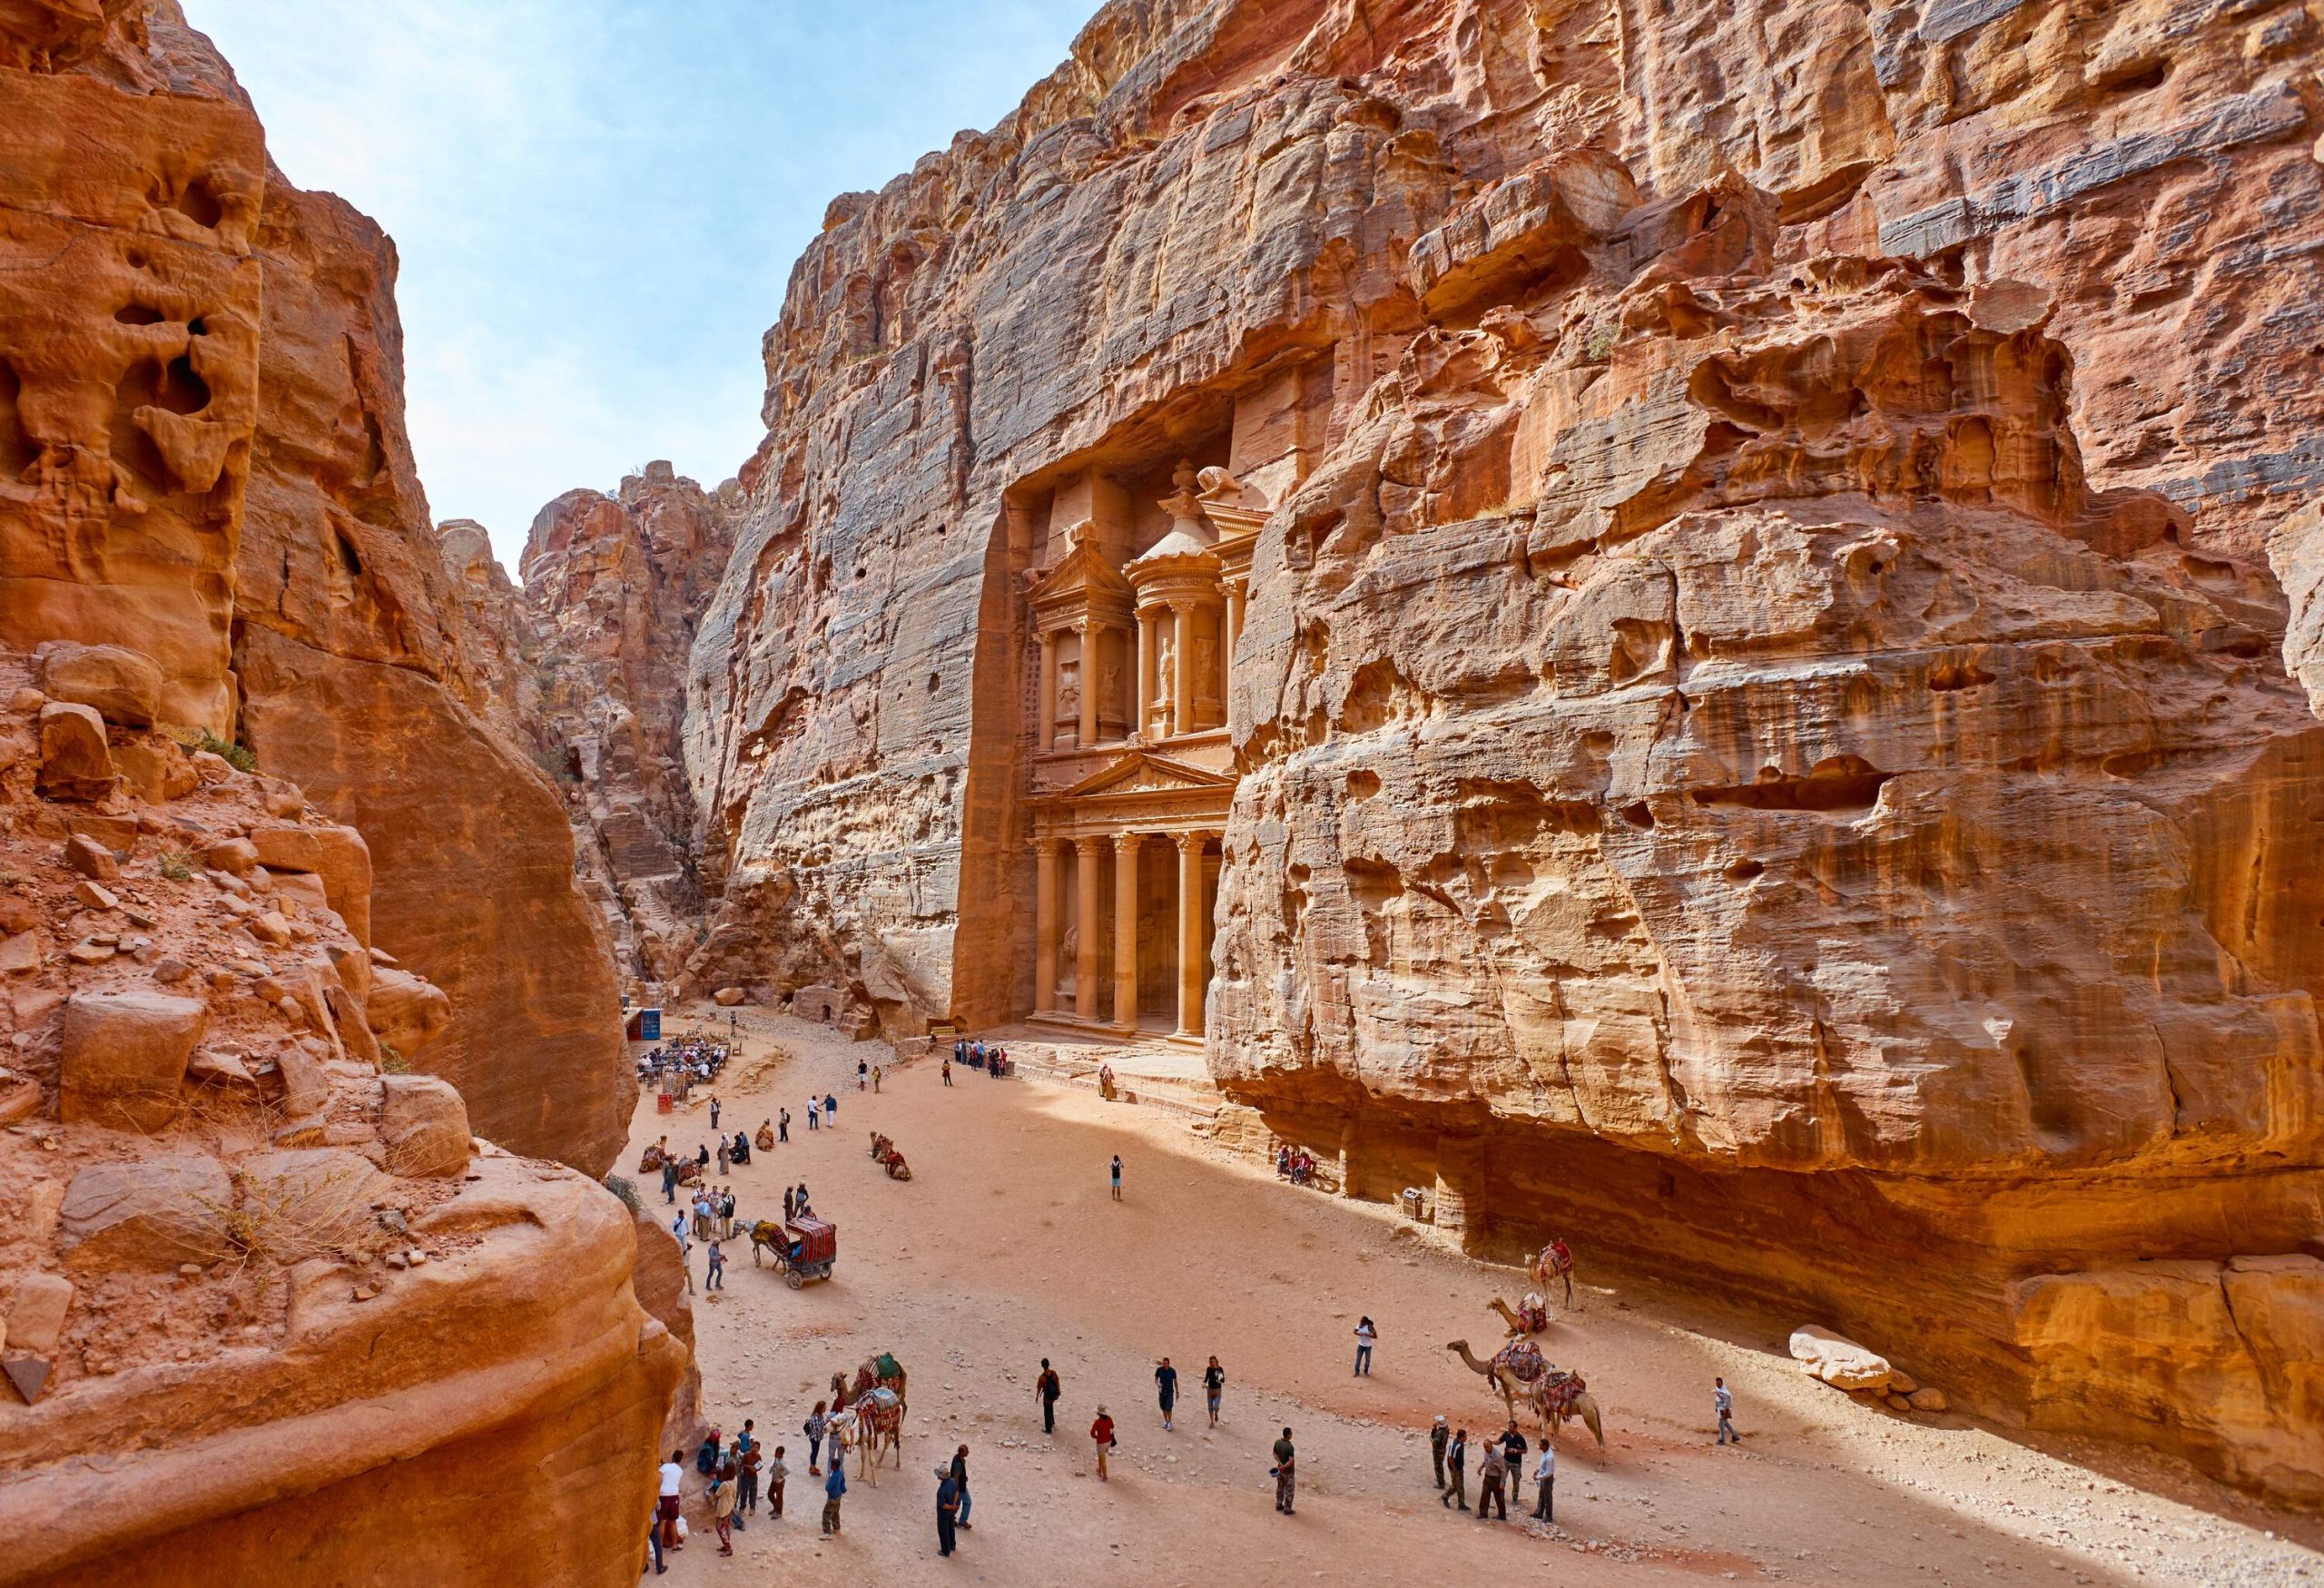 A crowded path towards a pillared temple carved on the side of a sandstone cliff.